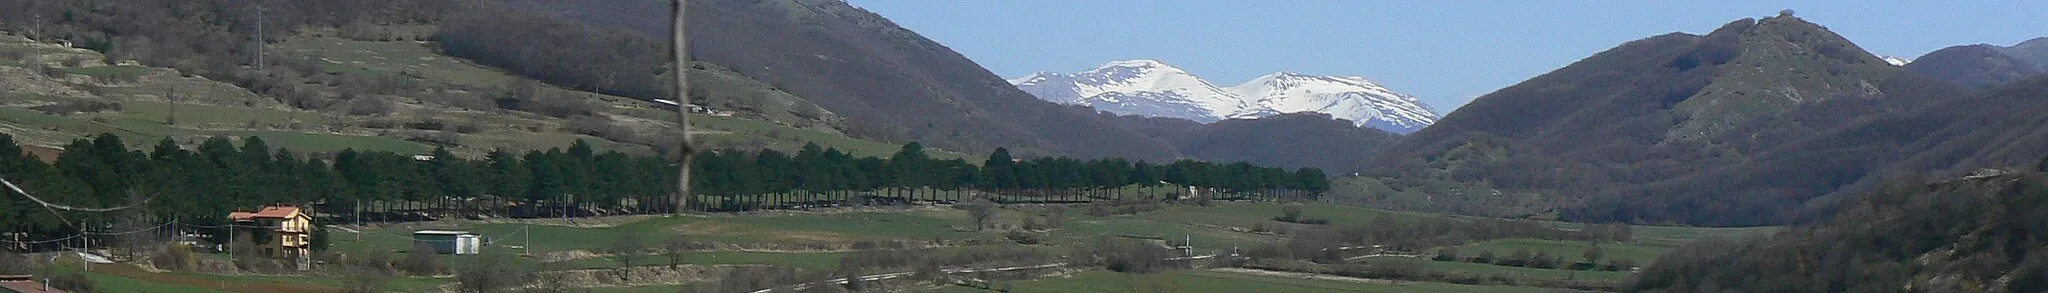 Photo showing: View of Sella di Corno plateau, in the point where lies the border between Lazio and Abruzzo, Italy. The tree-lined street at left is state highway n. 17, while on foreground Terni-Rieti-L'Aquila railway can be seen (trait between Rocca di Corno station and Sella di Corno station, which is the highest point of the line at 989 metres on the sea level) with a level crossing without barriers and a watchman's house indicating the kilometer 150.